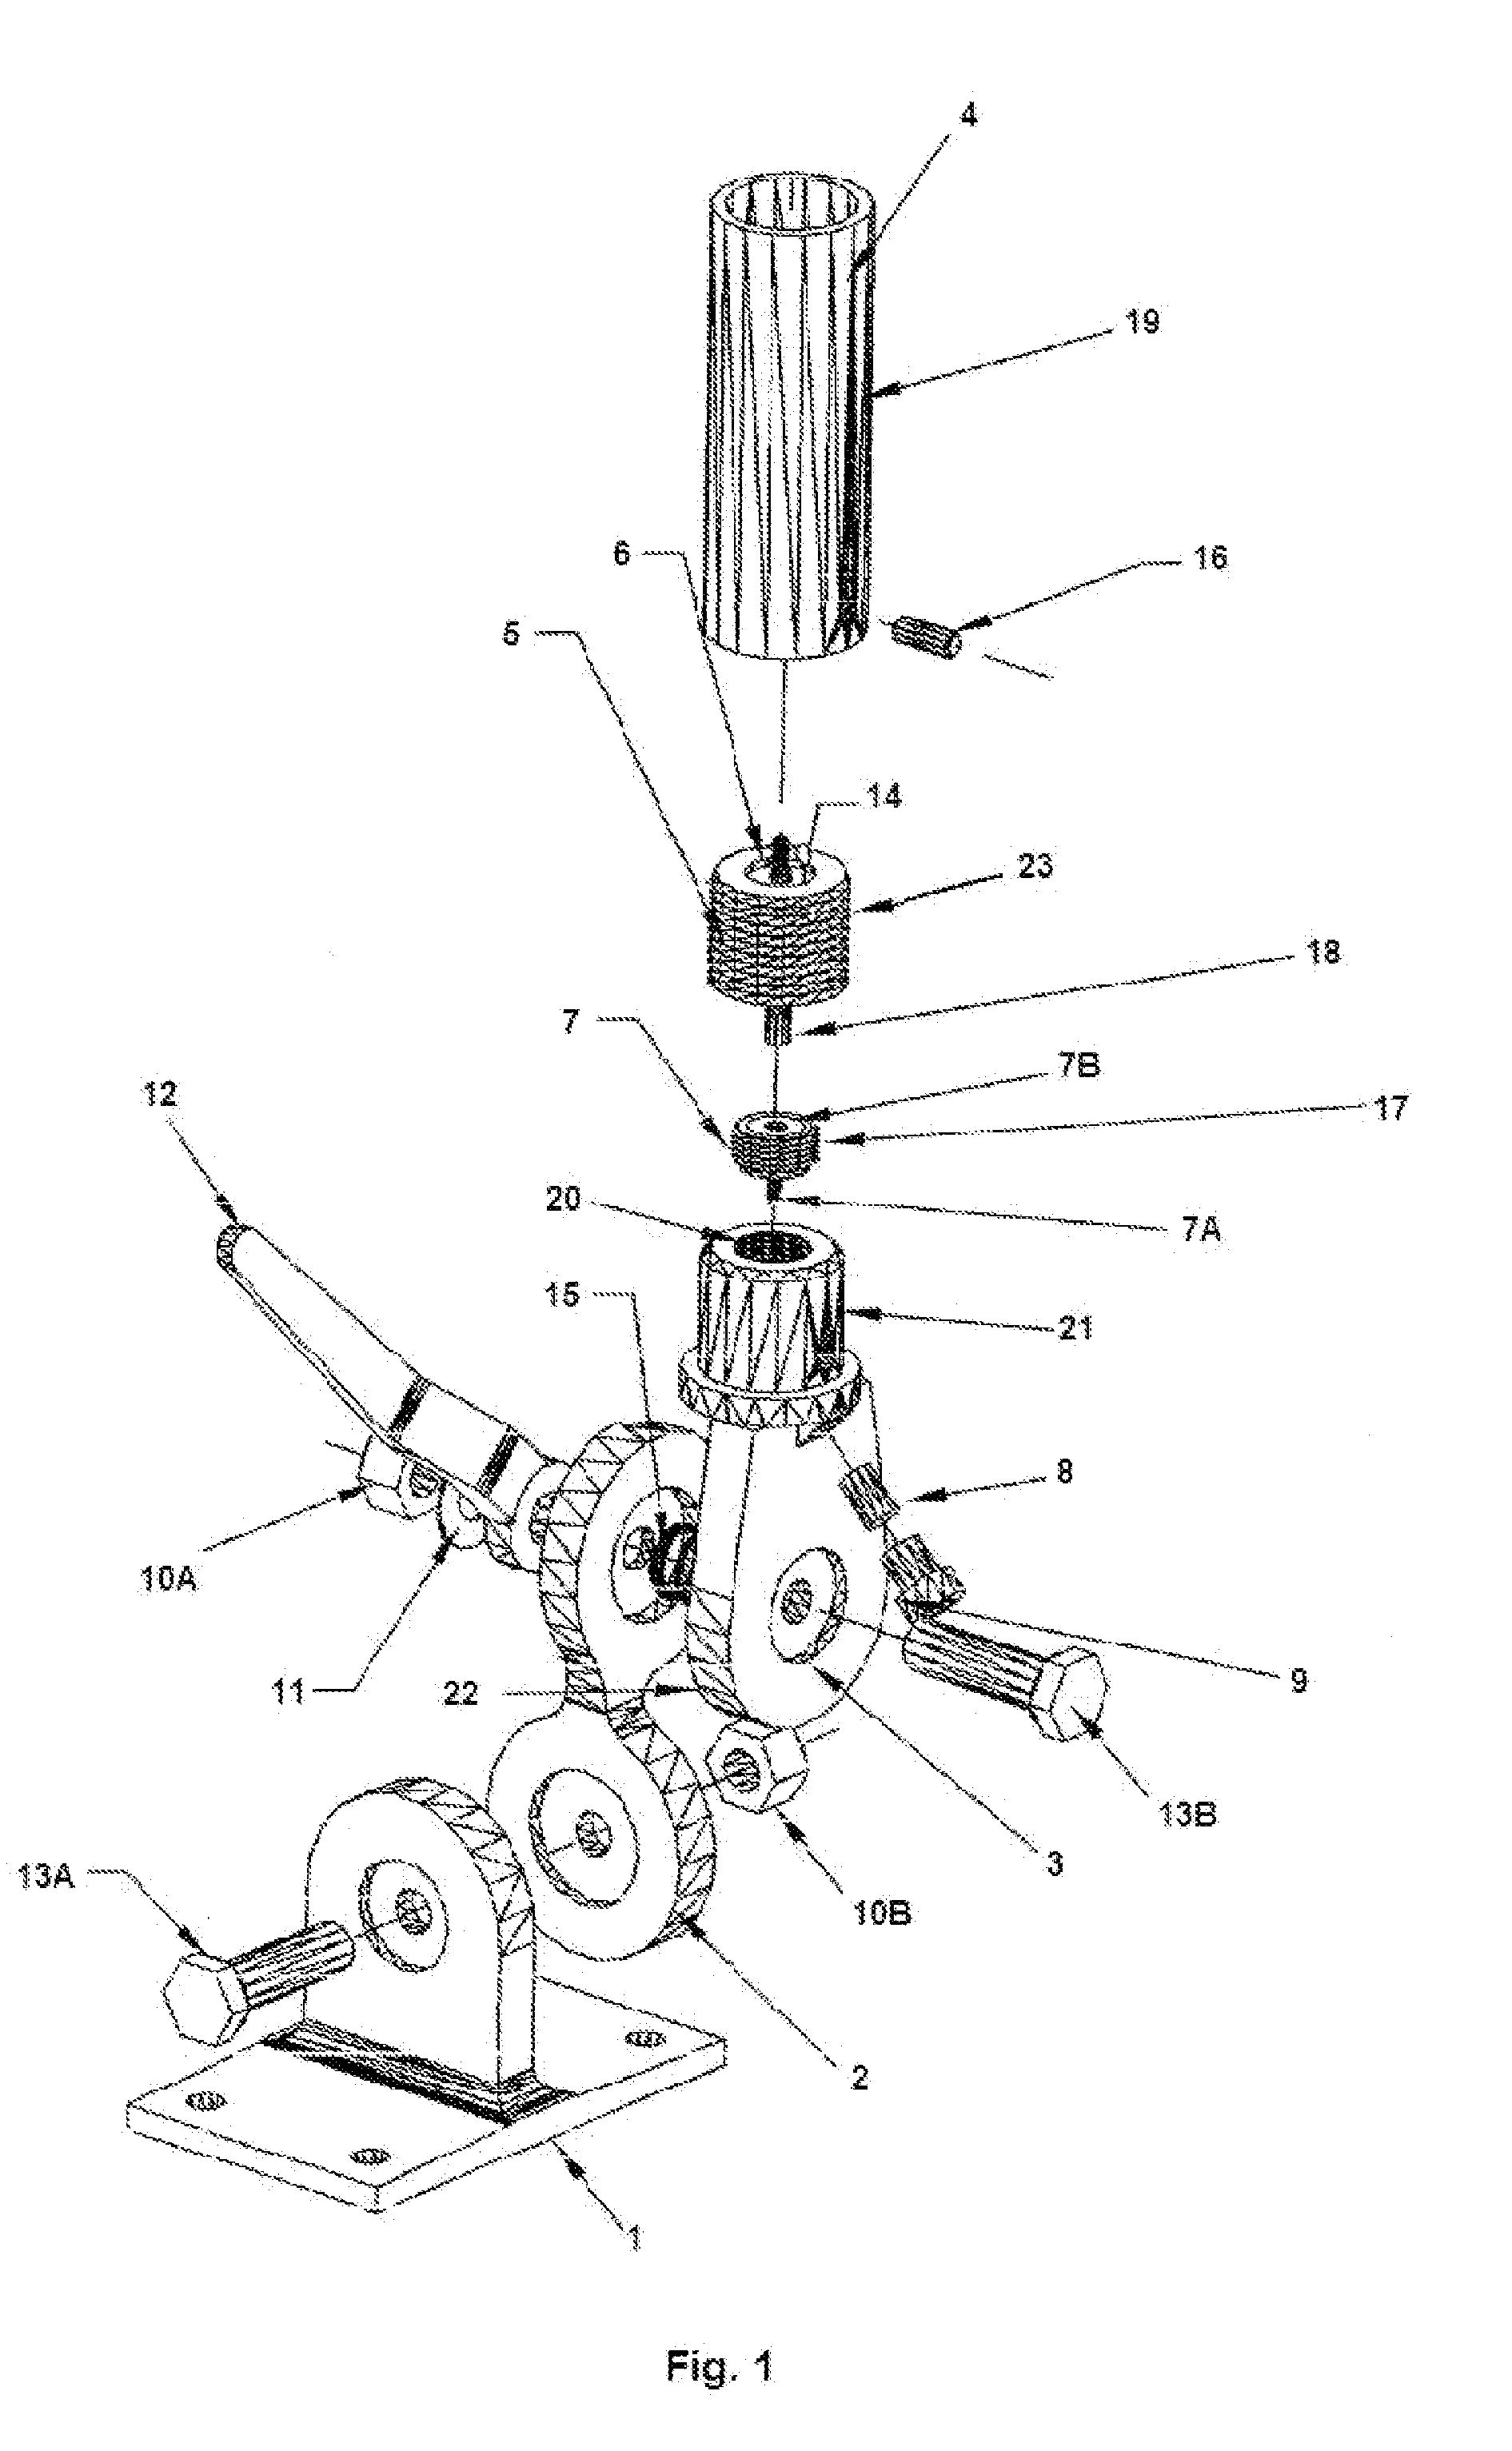 Baylyn antenna mounting apparatus and system